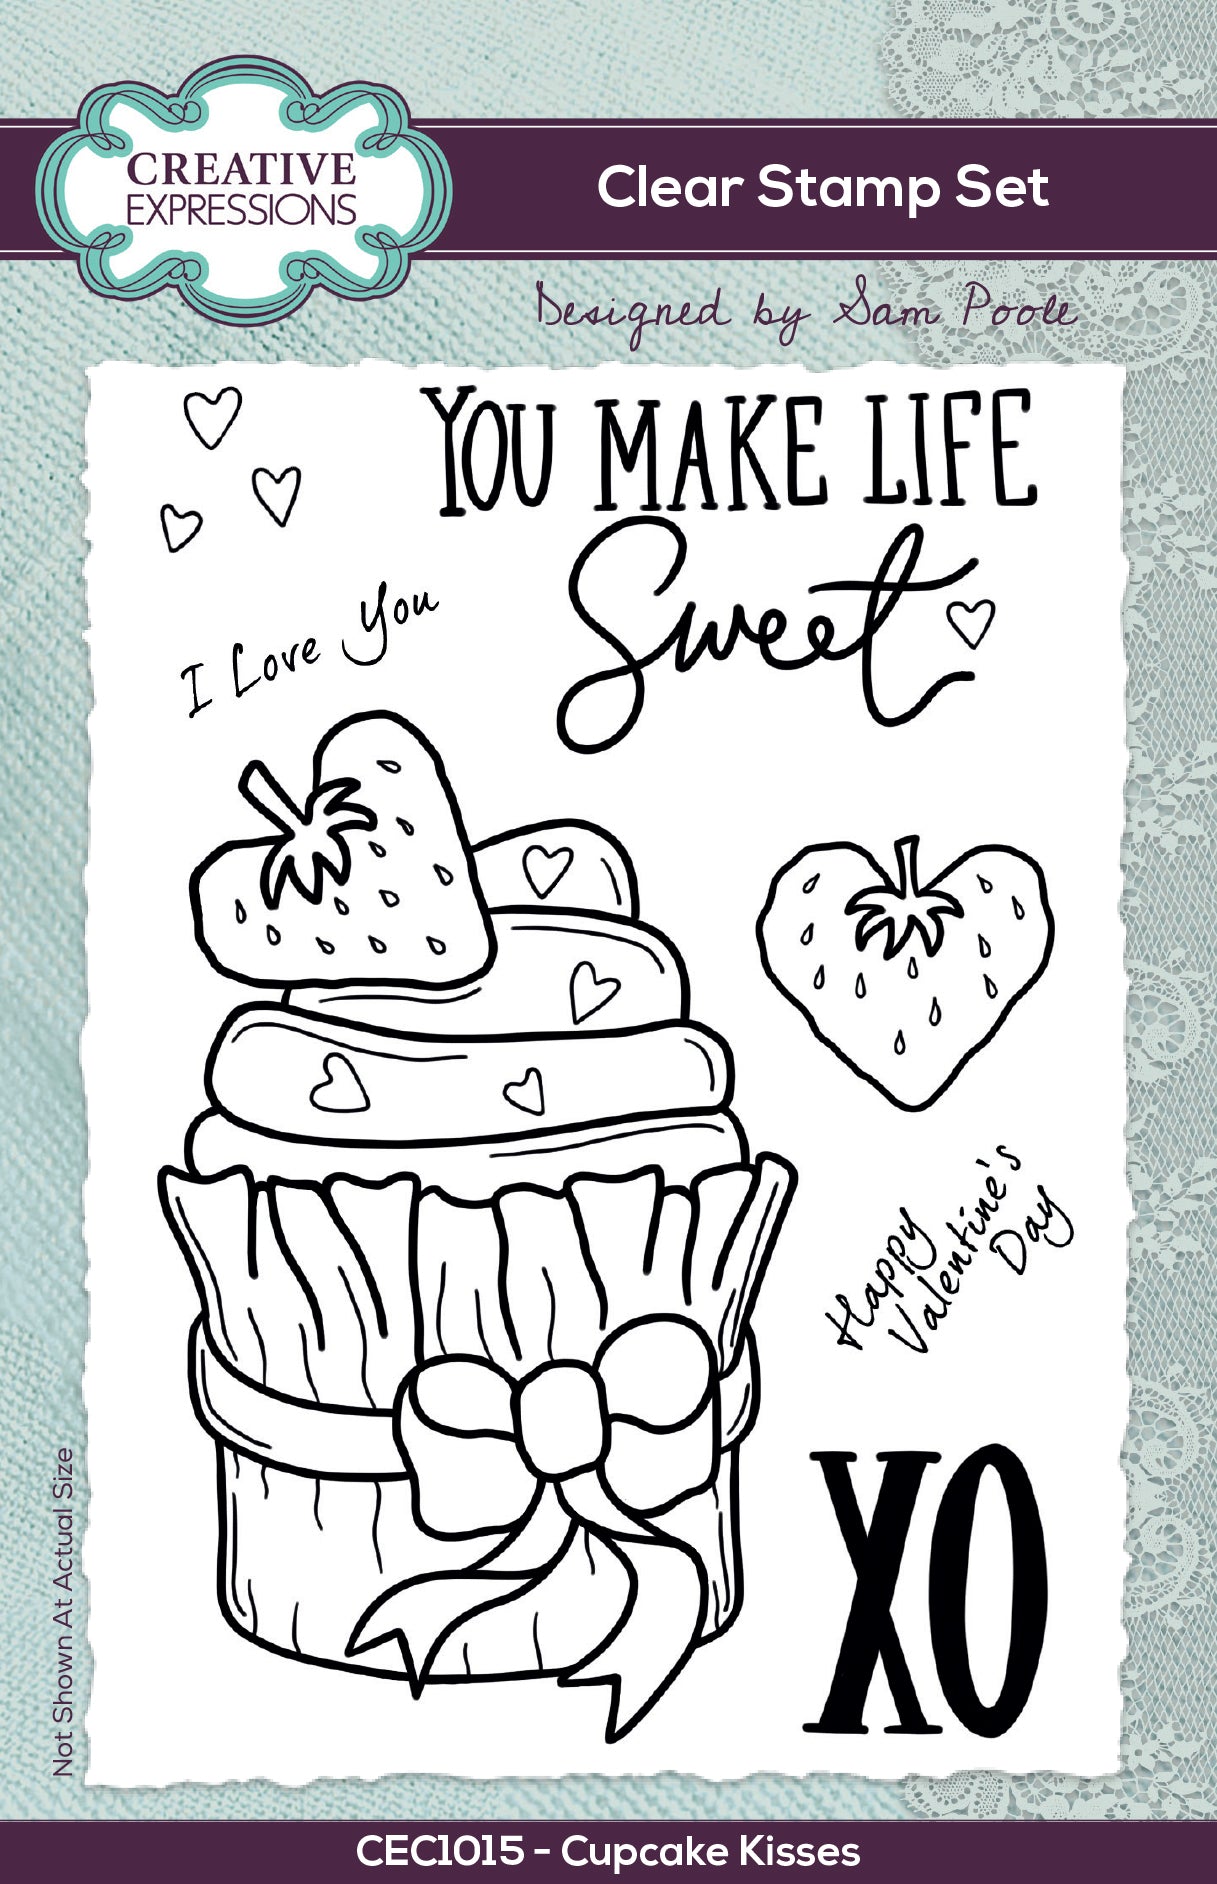 Creative Expressions Sam Poole Cupcake Kisses 6 in x 4 in Clear Stamp Set